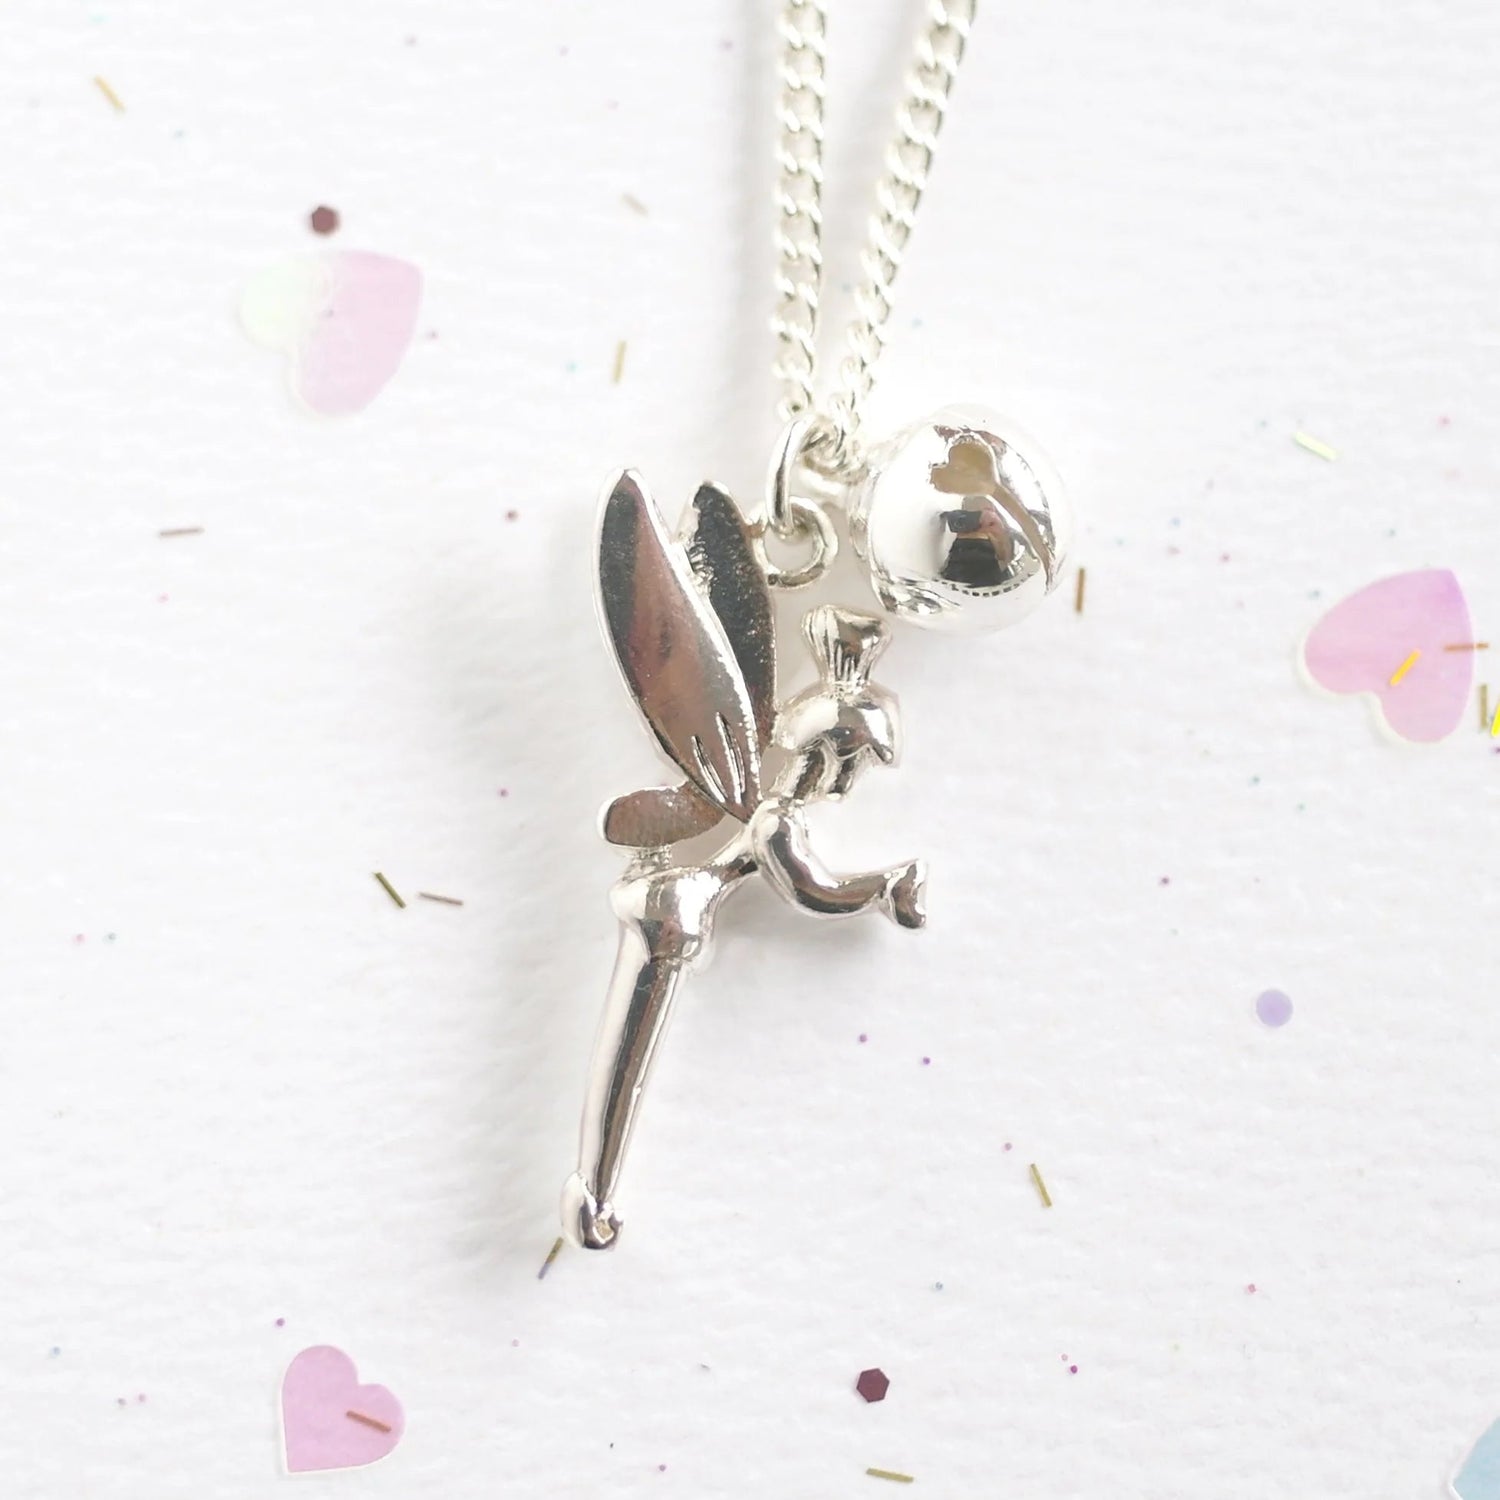 LAUREN HINKLEY | FAIRY NECKLACE WITH BELL by LAUREN HINKLEY AUSTRALIA - The Playful Collective